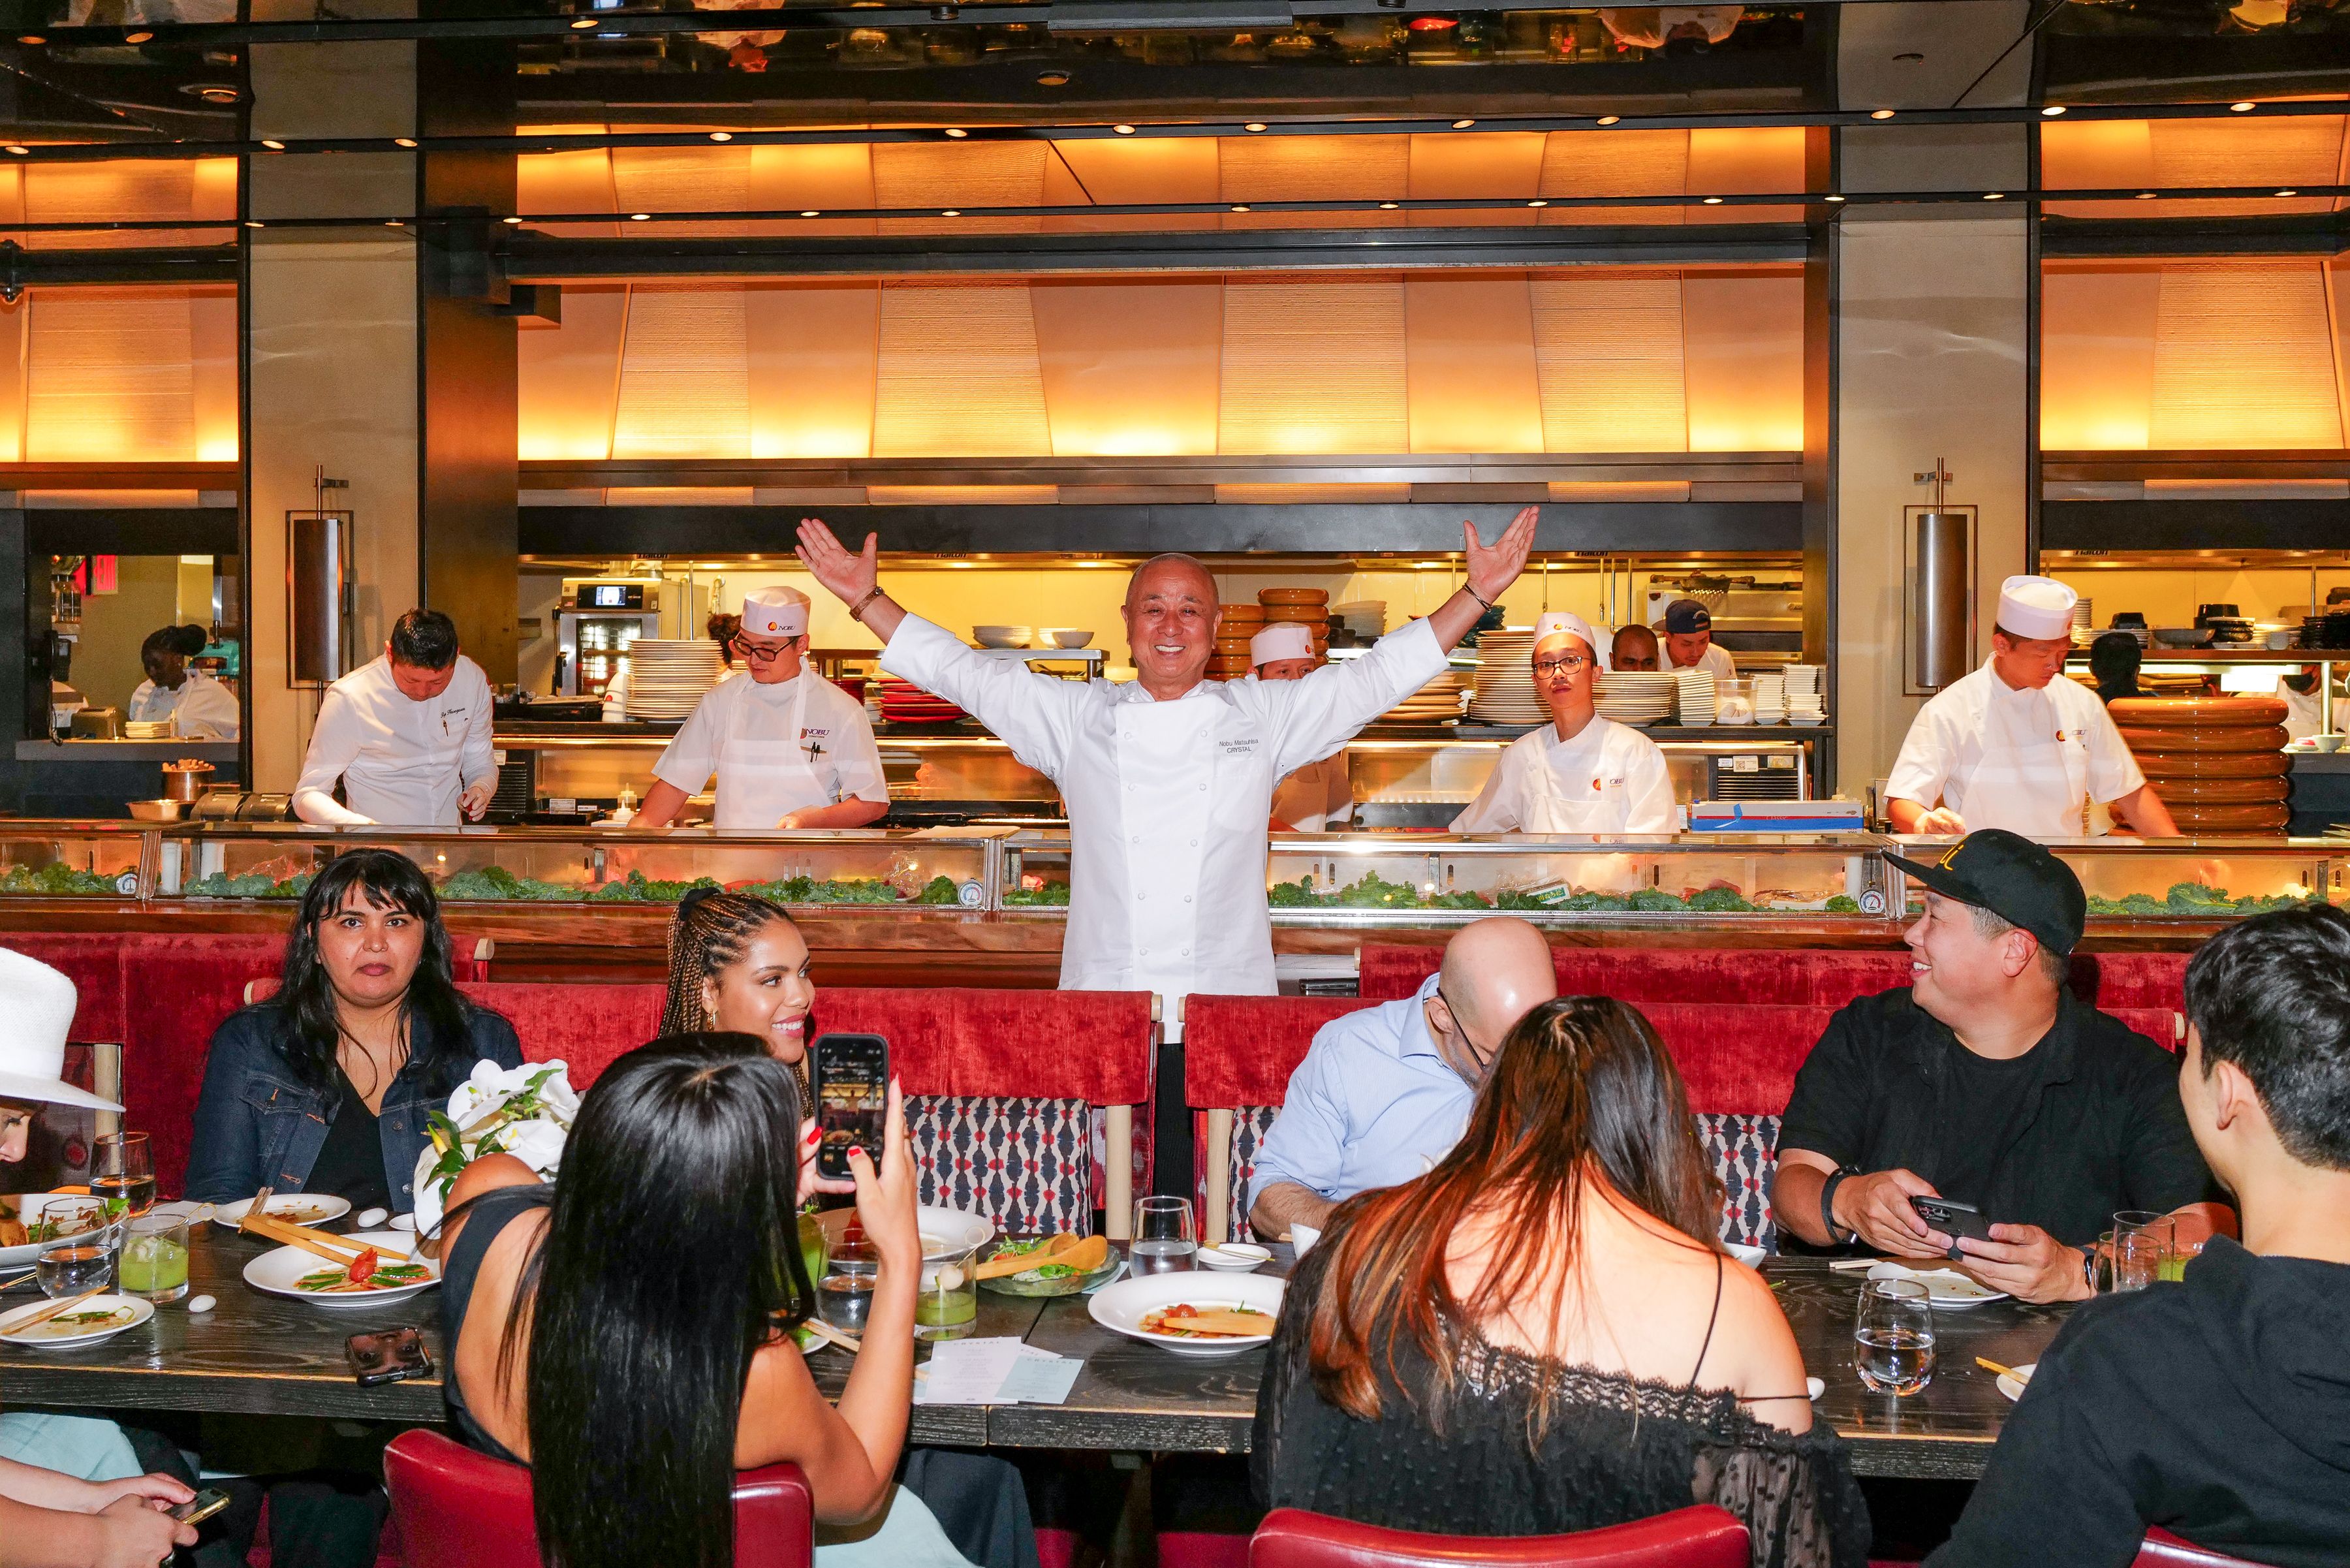 Chef Nobu delights guests with his vivacious personality at his Downtown NYC restaurant